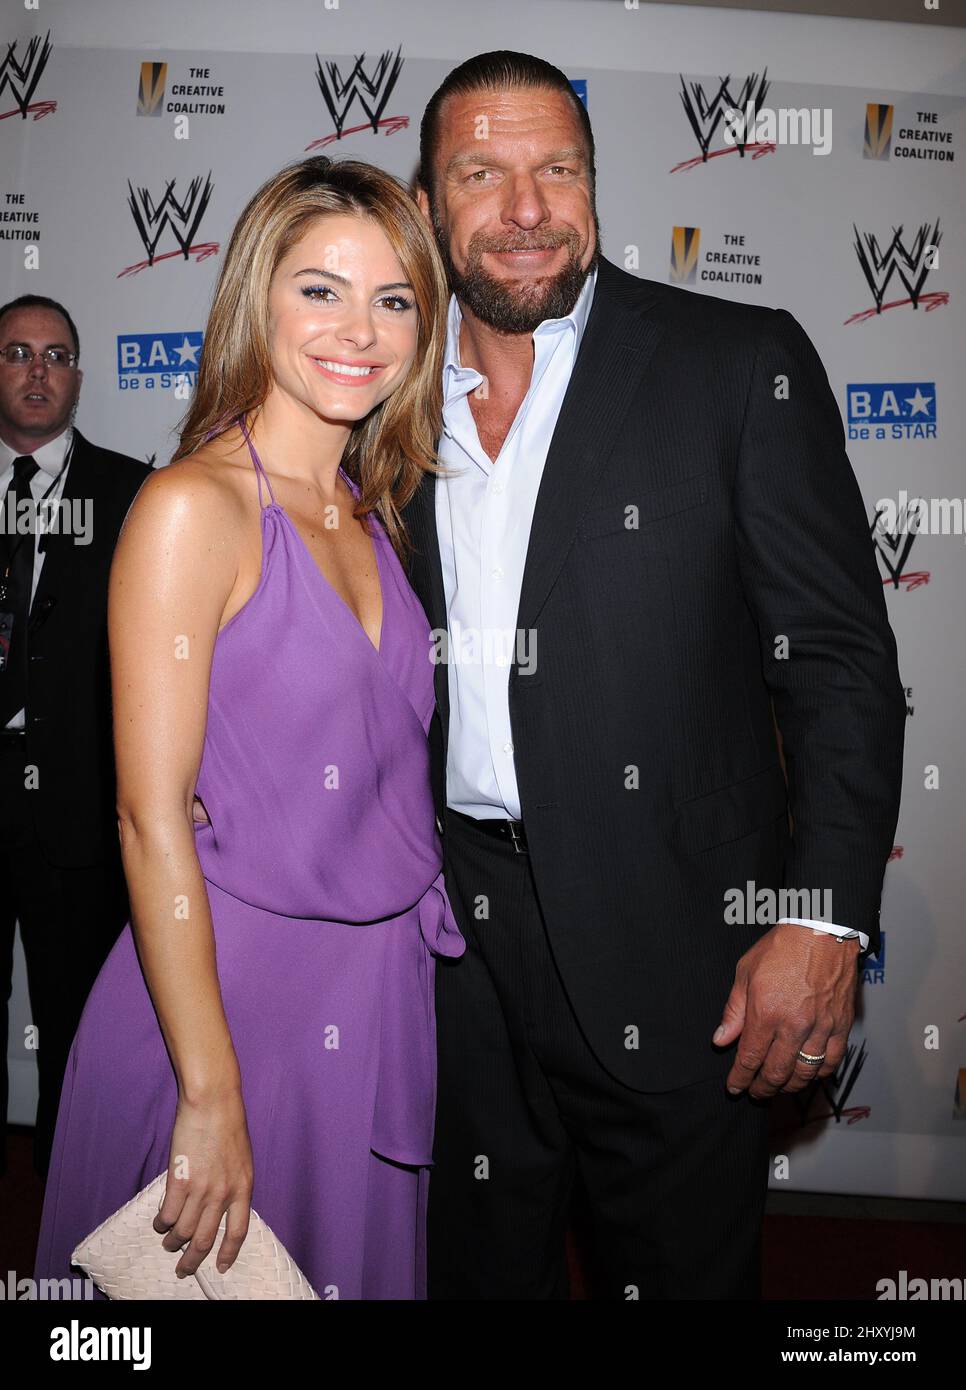 Triple H and Maria Menounos attends the WWE SummerSlam VIP Kick-Off Party held at the Beverly Hills Hotel, Los Angeles, California. Stock Photo